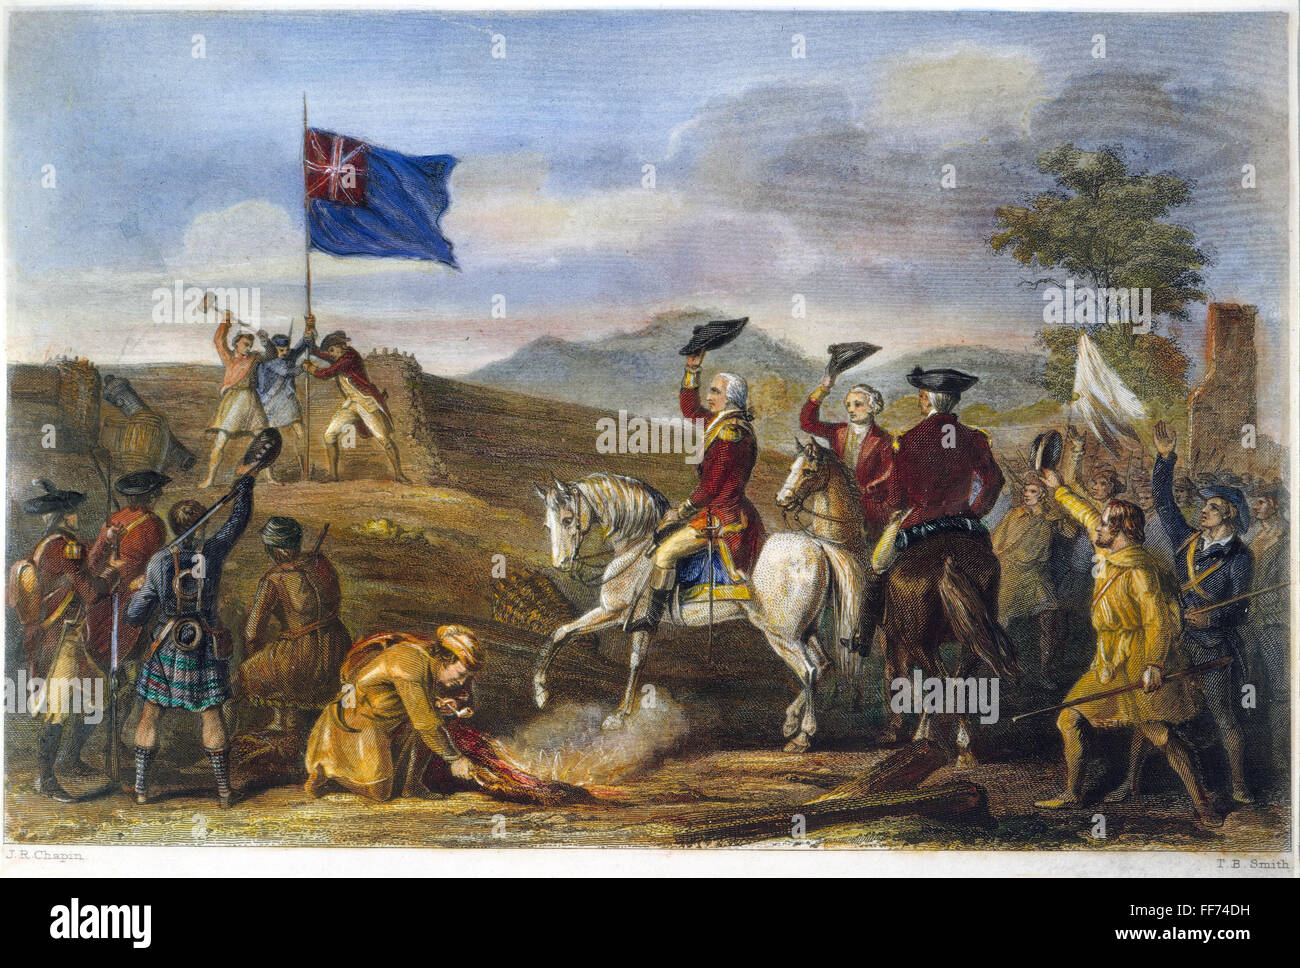 WASHINGTON: FORT DUQUESNE. /nColonel George Washington (center) of the Virginia militia raising his hat to the British flag over Fort Duquesne (rebuilt as Fort Pitt) in November 1758: colored engraving, 19th century. Stock Photo